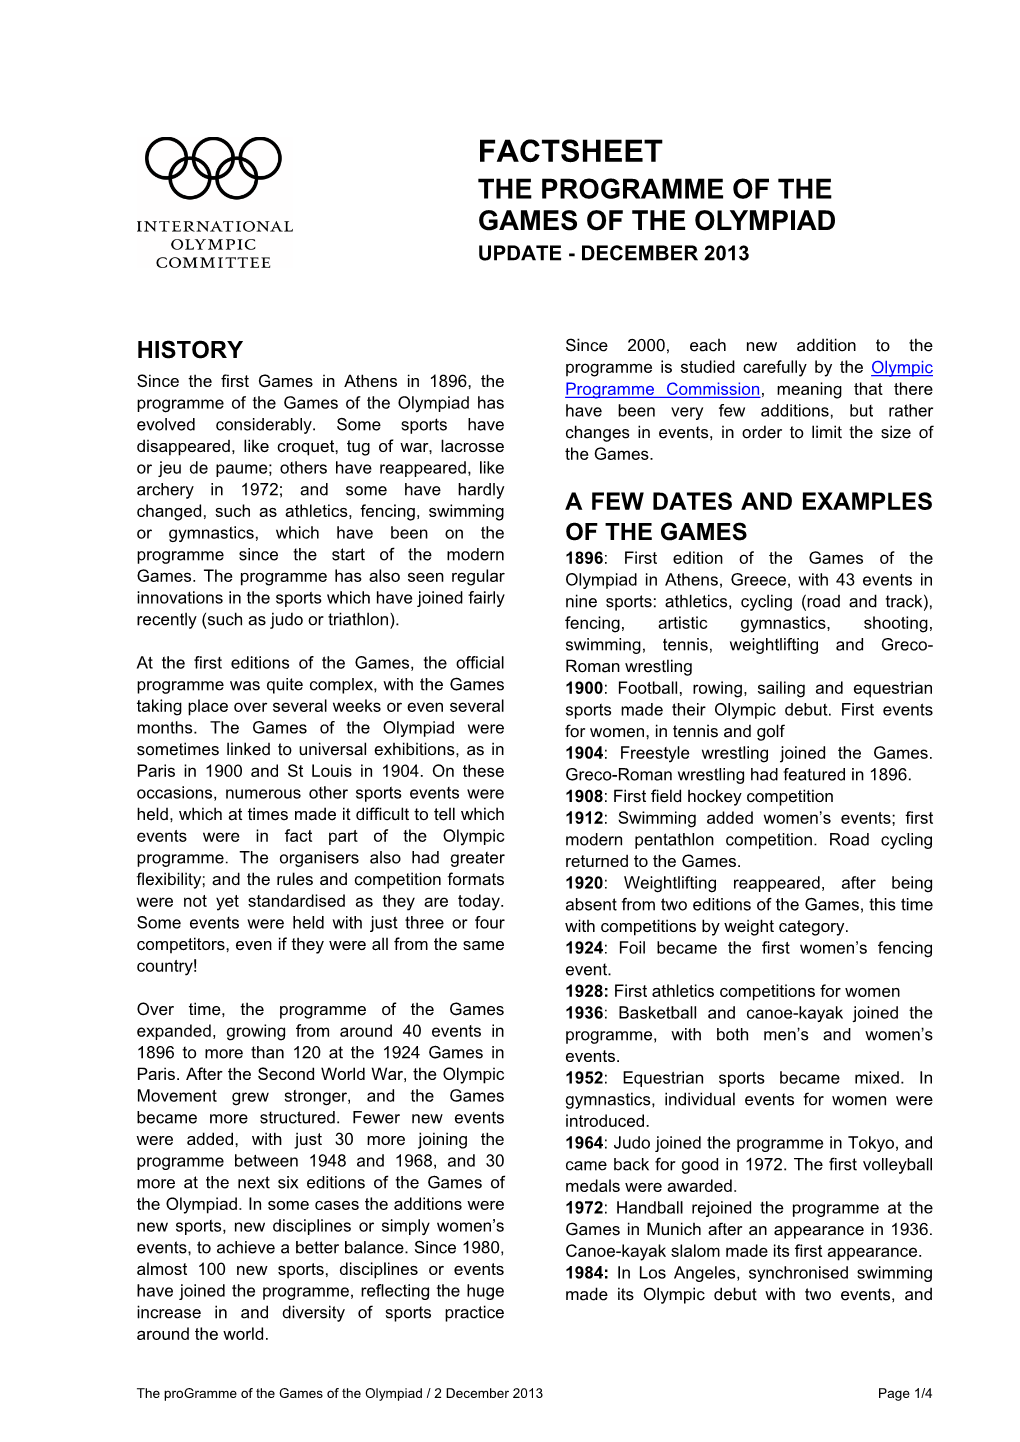 Factsheet the Programme of the Games of the Olympiad Update - December 2013